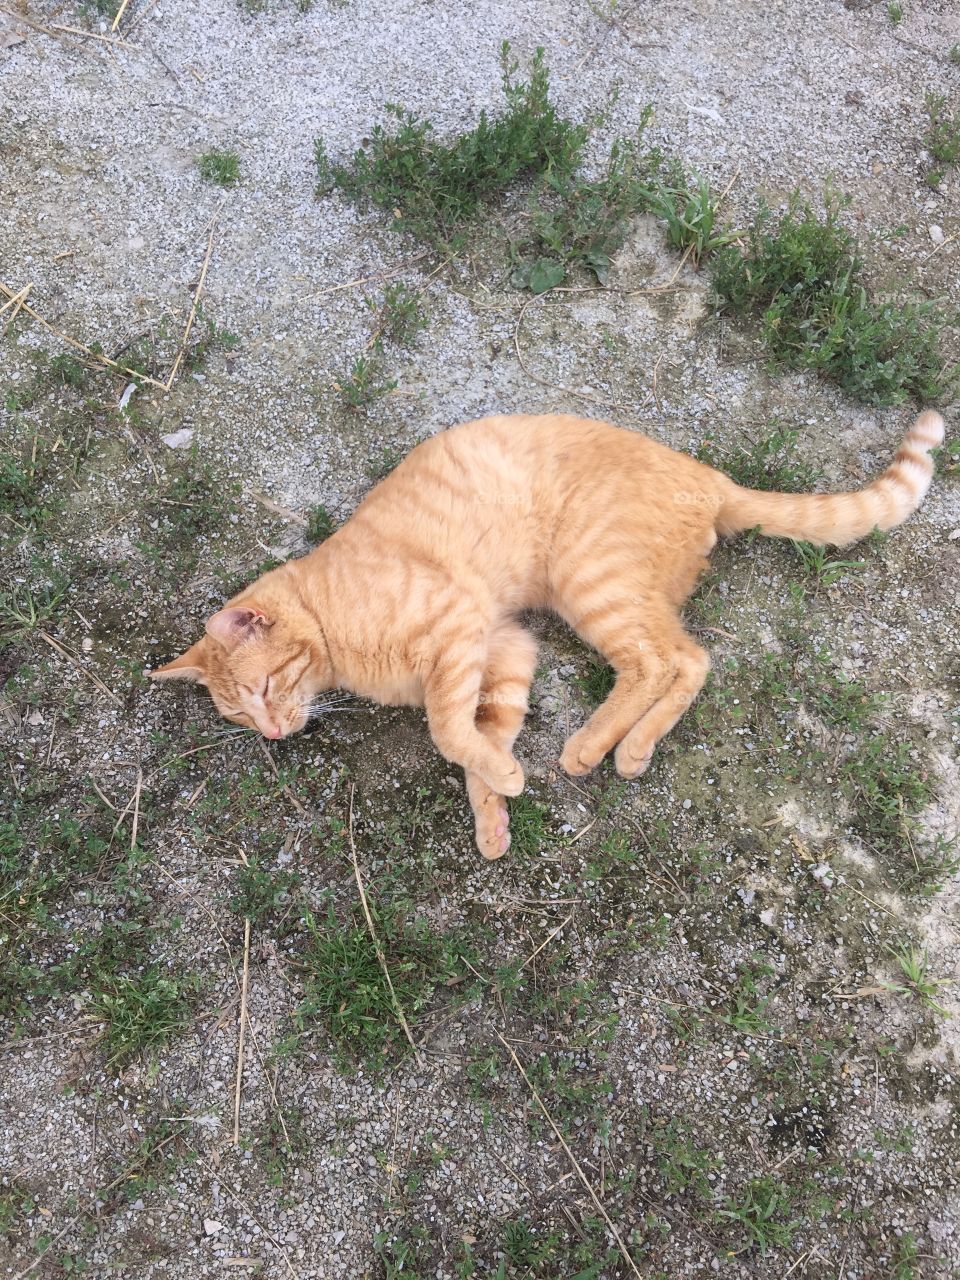 Orange cat . Very friendly and very much alive!